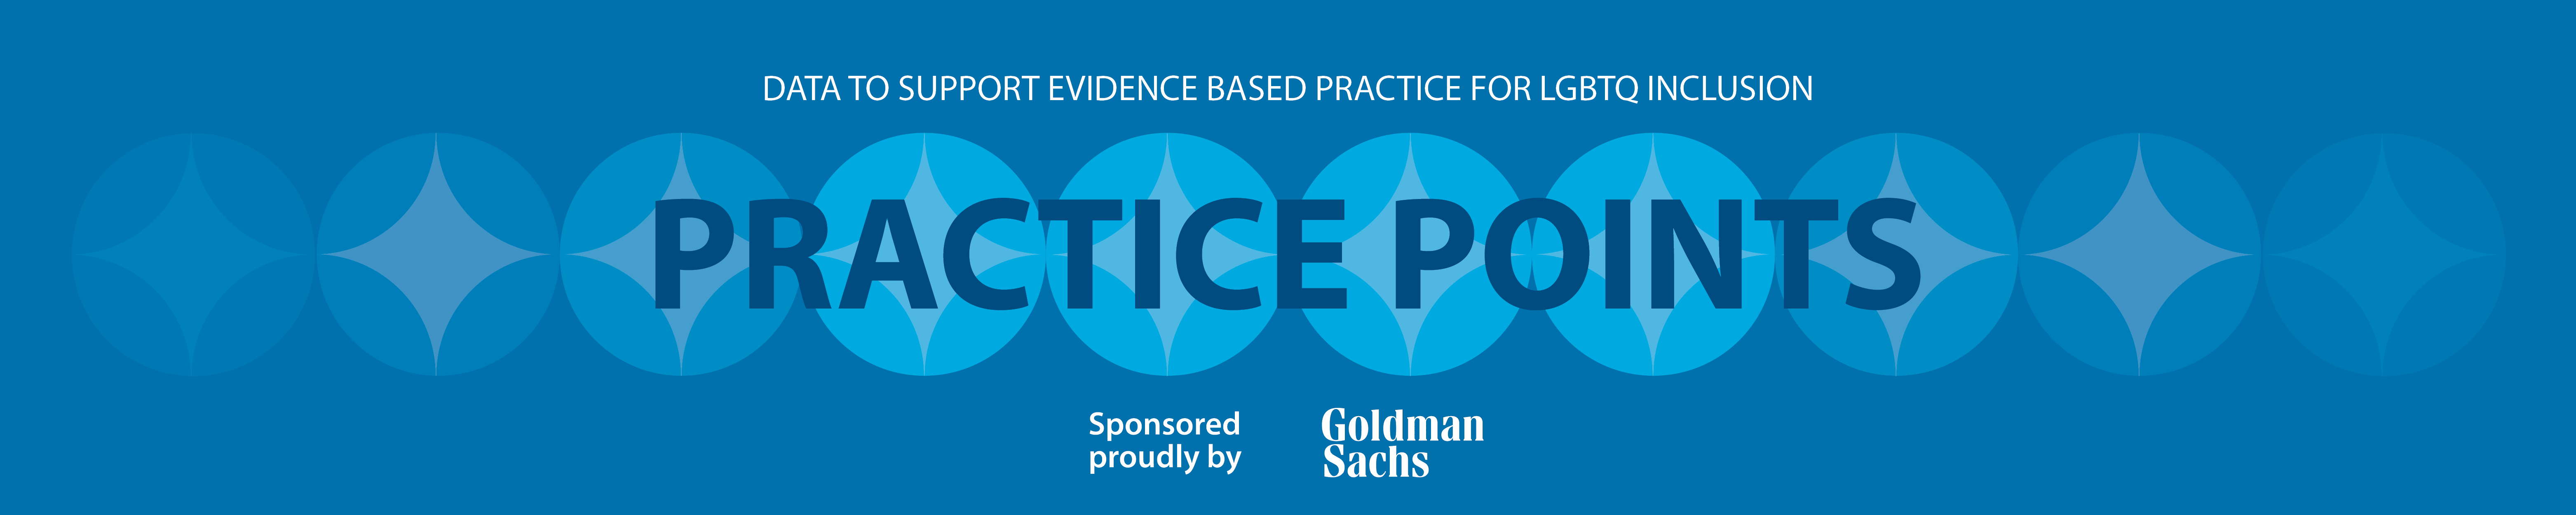 Data to support evidence based practice for LGBTQ inclusion - Practice Points - Sponsered proudly by Goldman Sachs